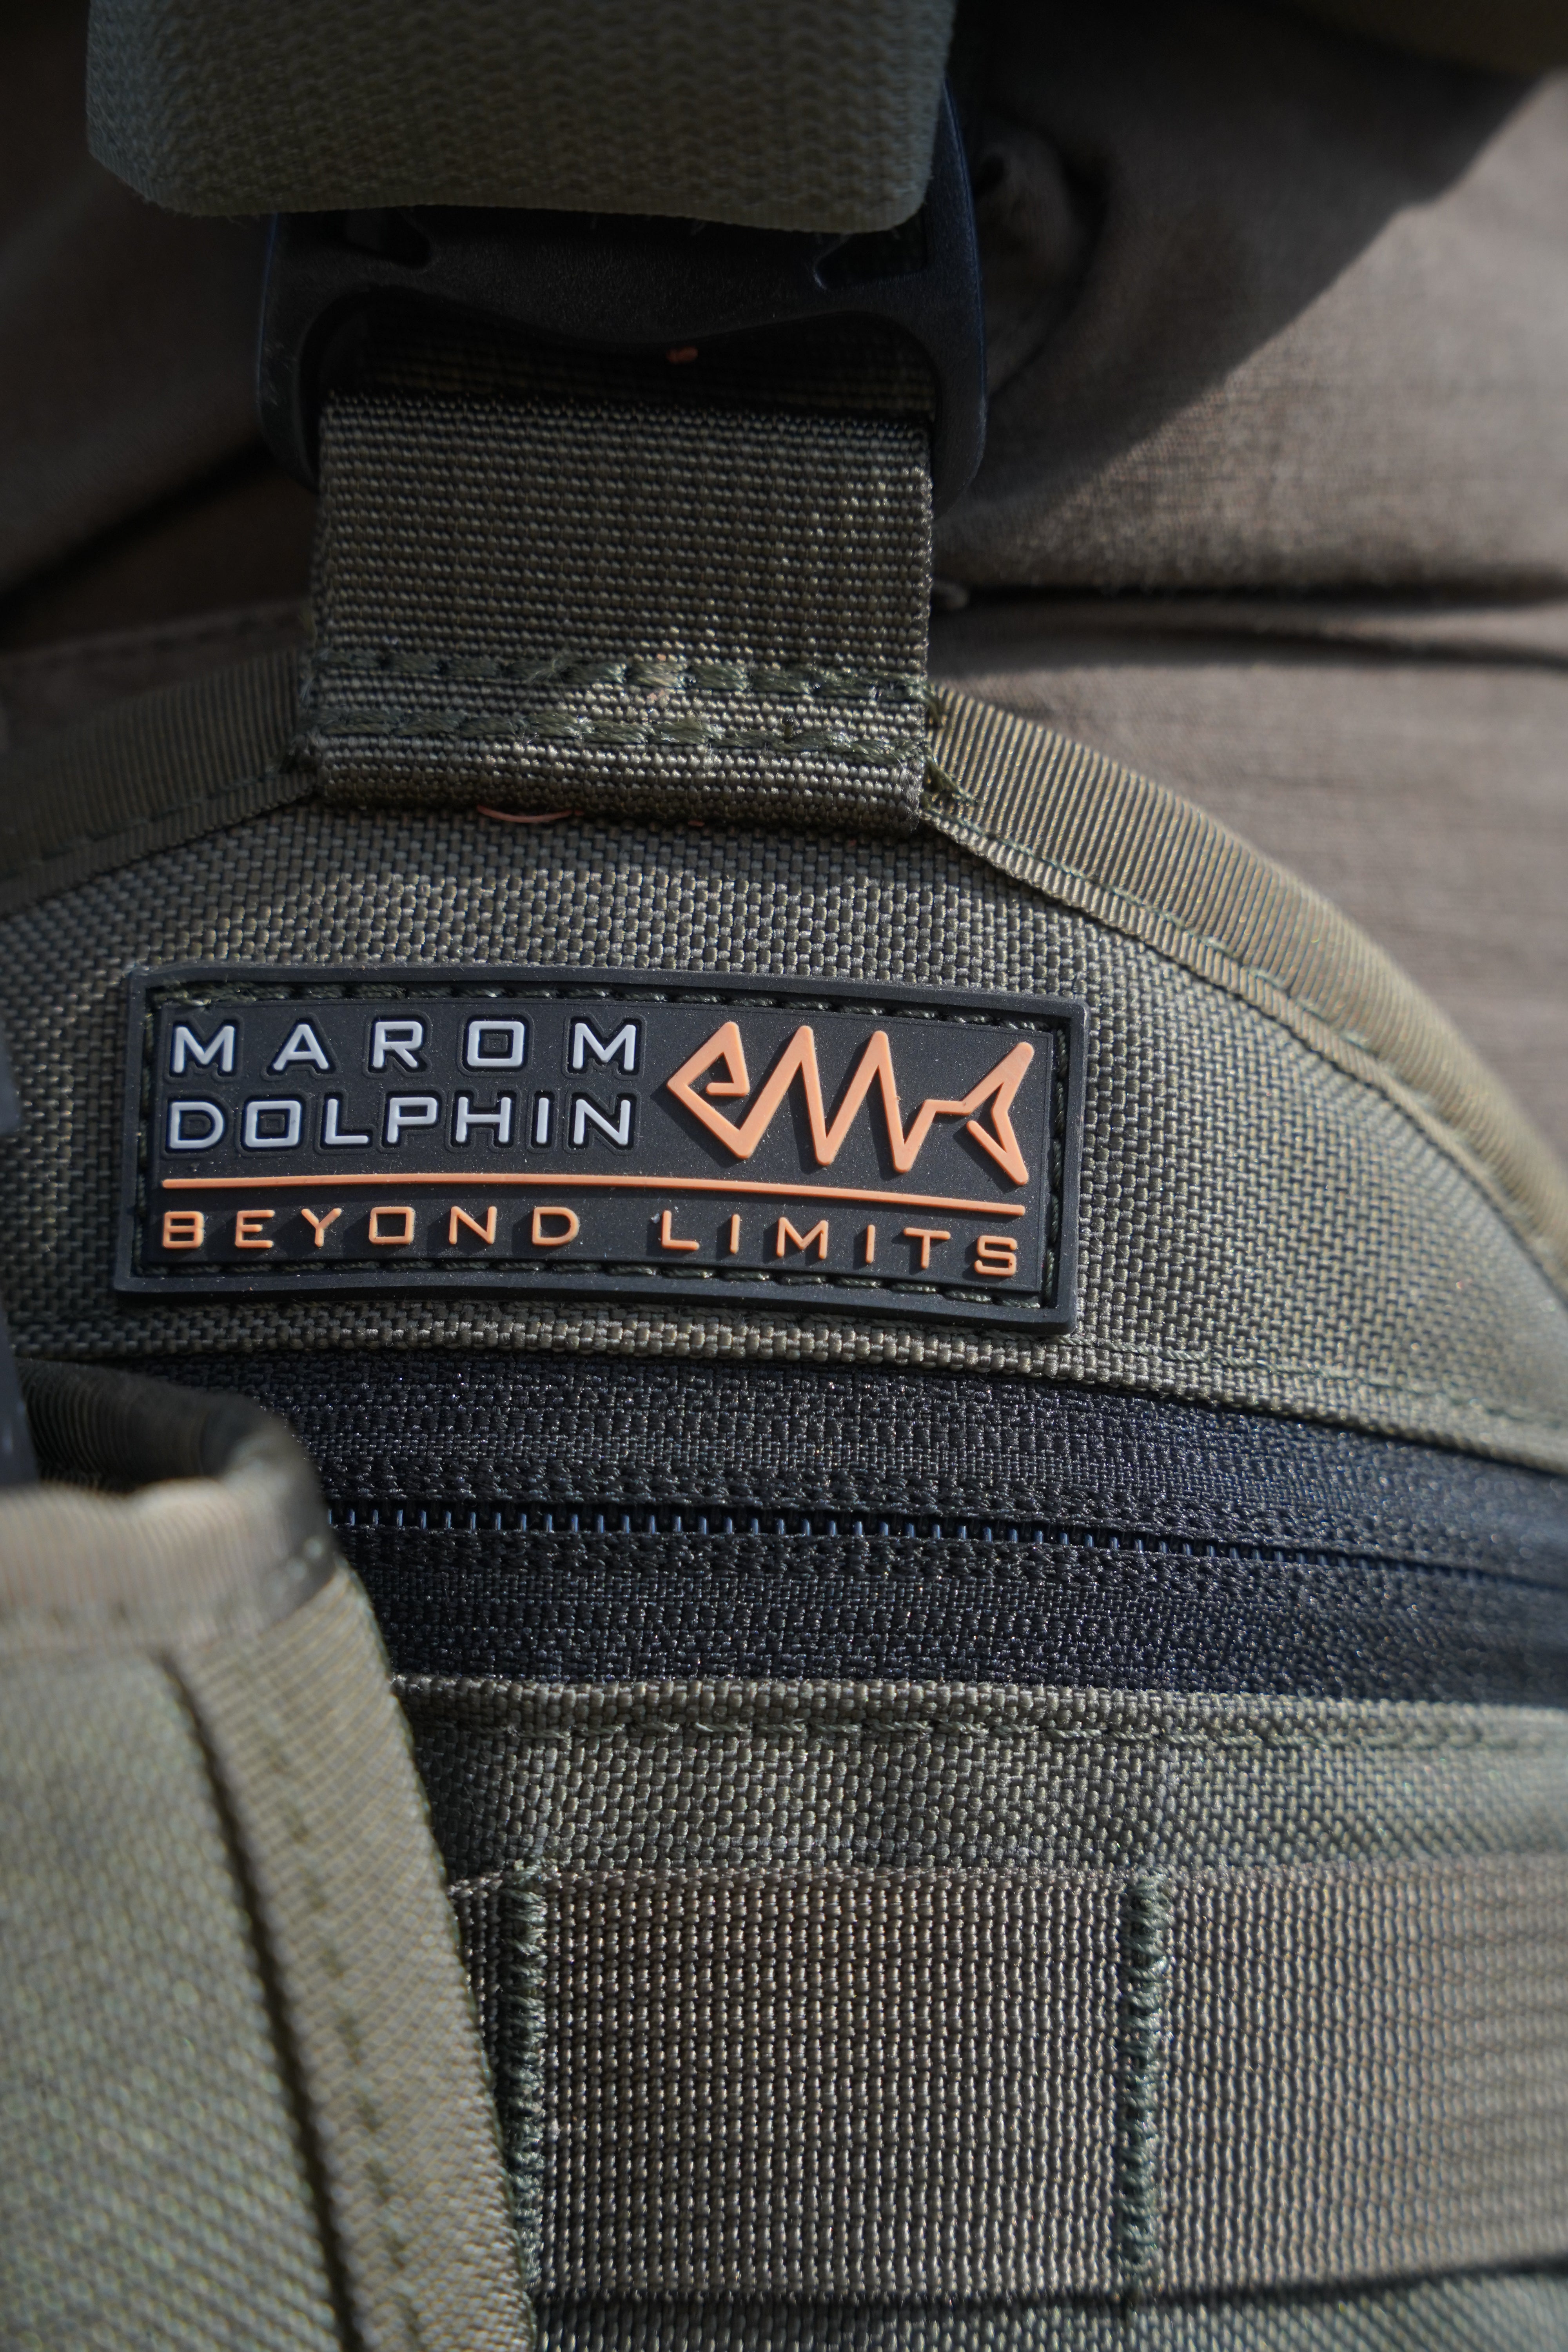 Marom Dolphin tactical accessories